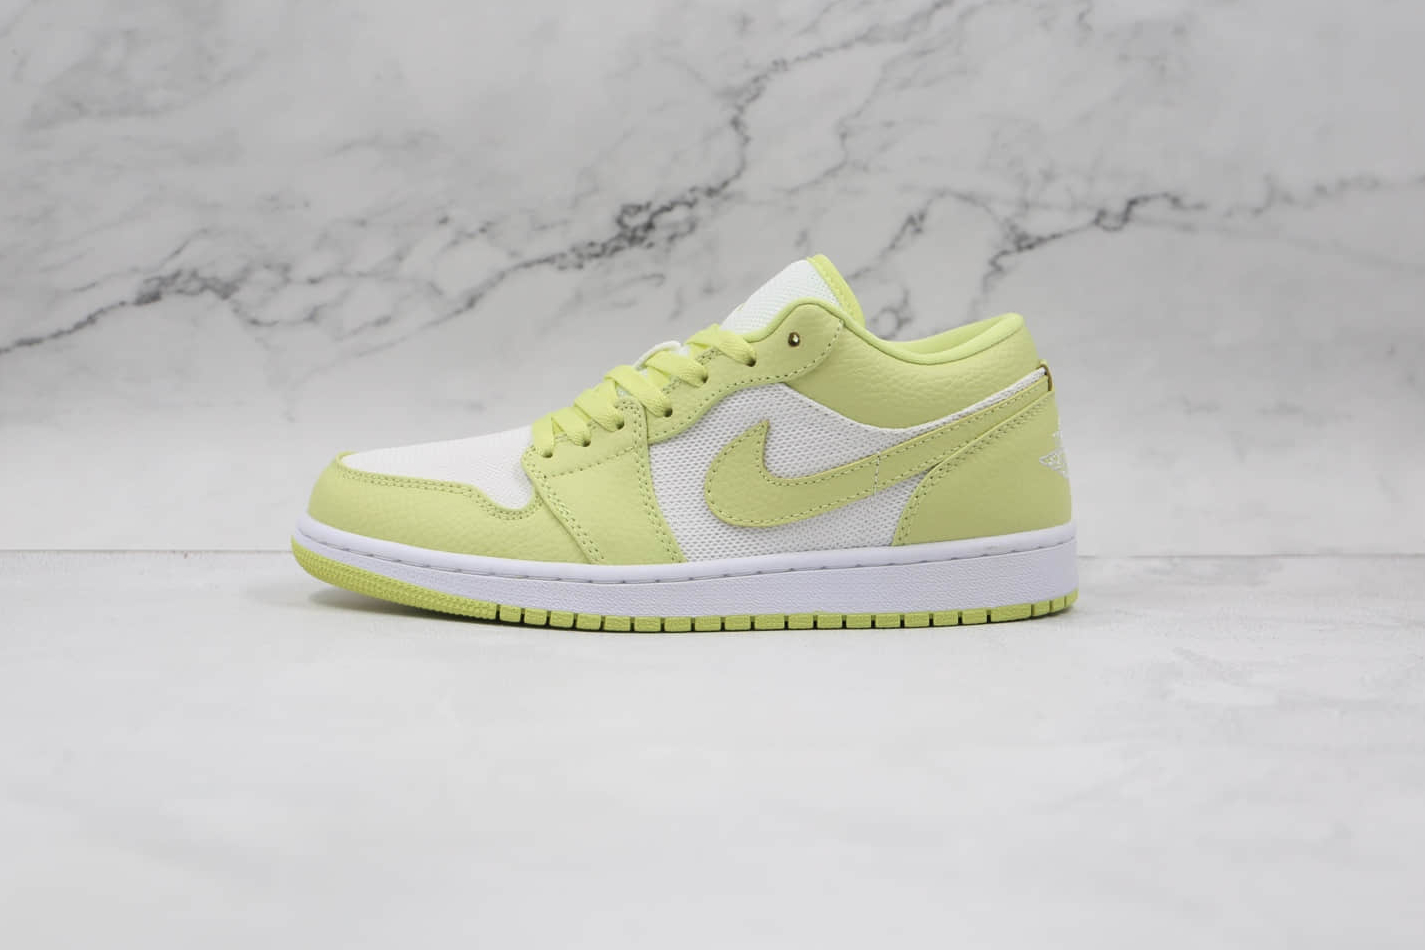 Air Jordan 1 Low 'Lucky Green' 553558-065 | Iconic Sneakers for Style